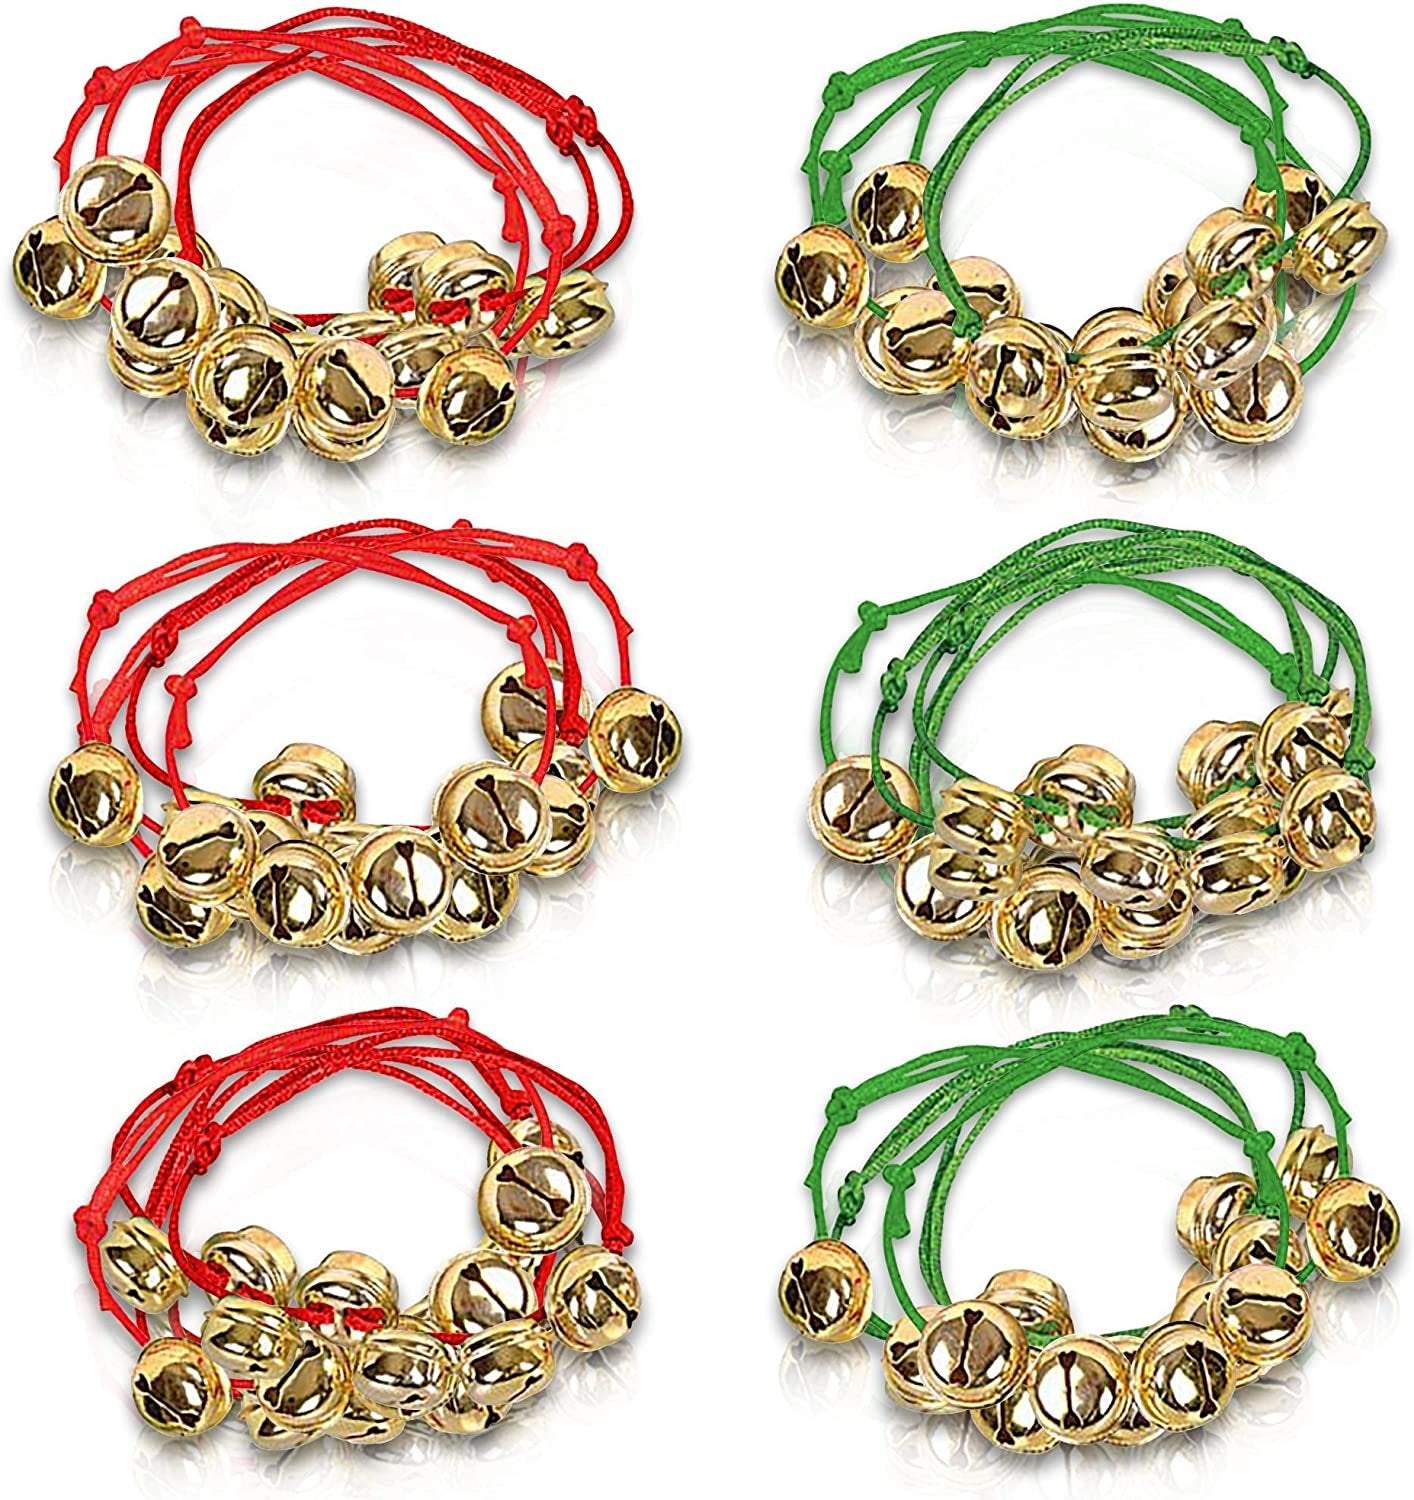 Jingle Bell Bracelets, Set of 24, Red and Green Adjustable Holiday Bell Bracelets, Christmas Stocking Stuffers for Kids and Adults, Fun Holiday Gifts and Goodie Bag Fillers